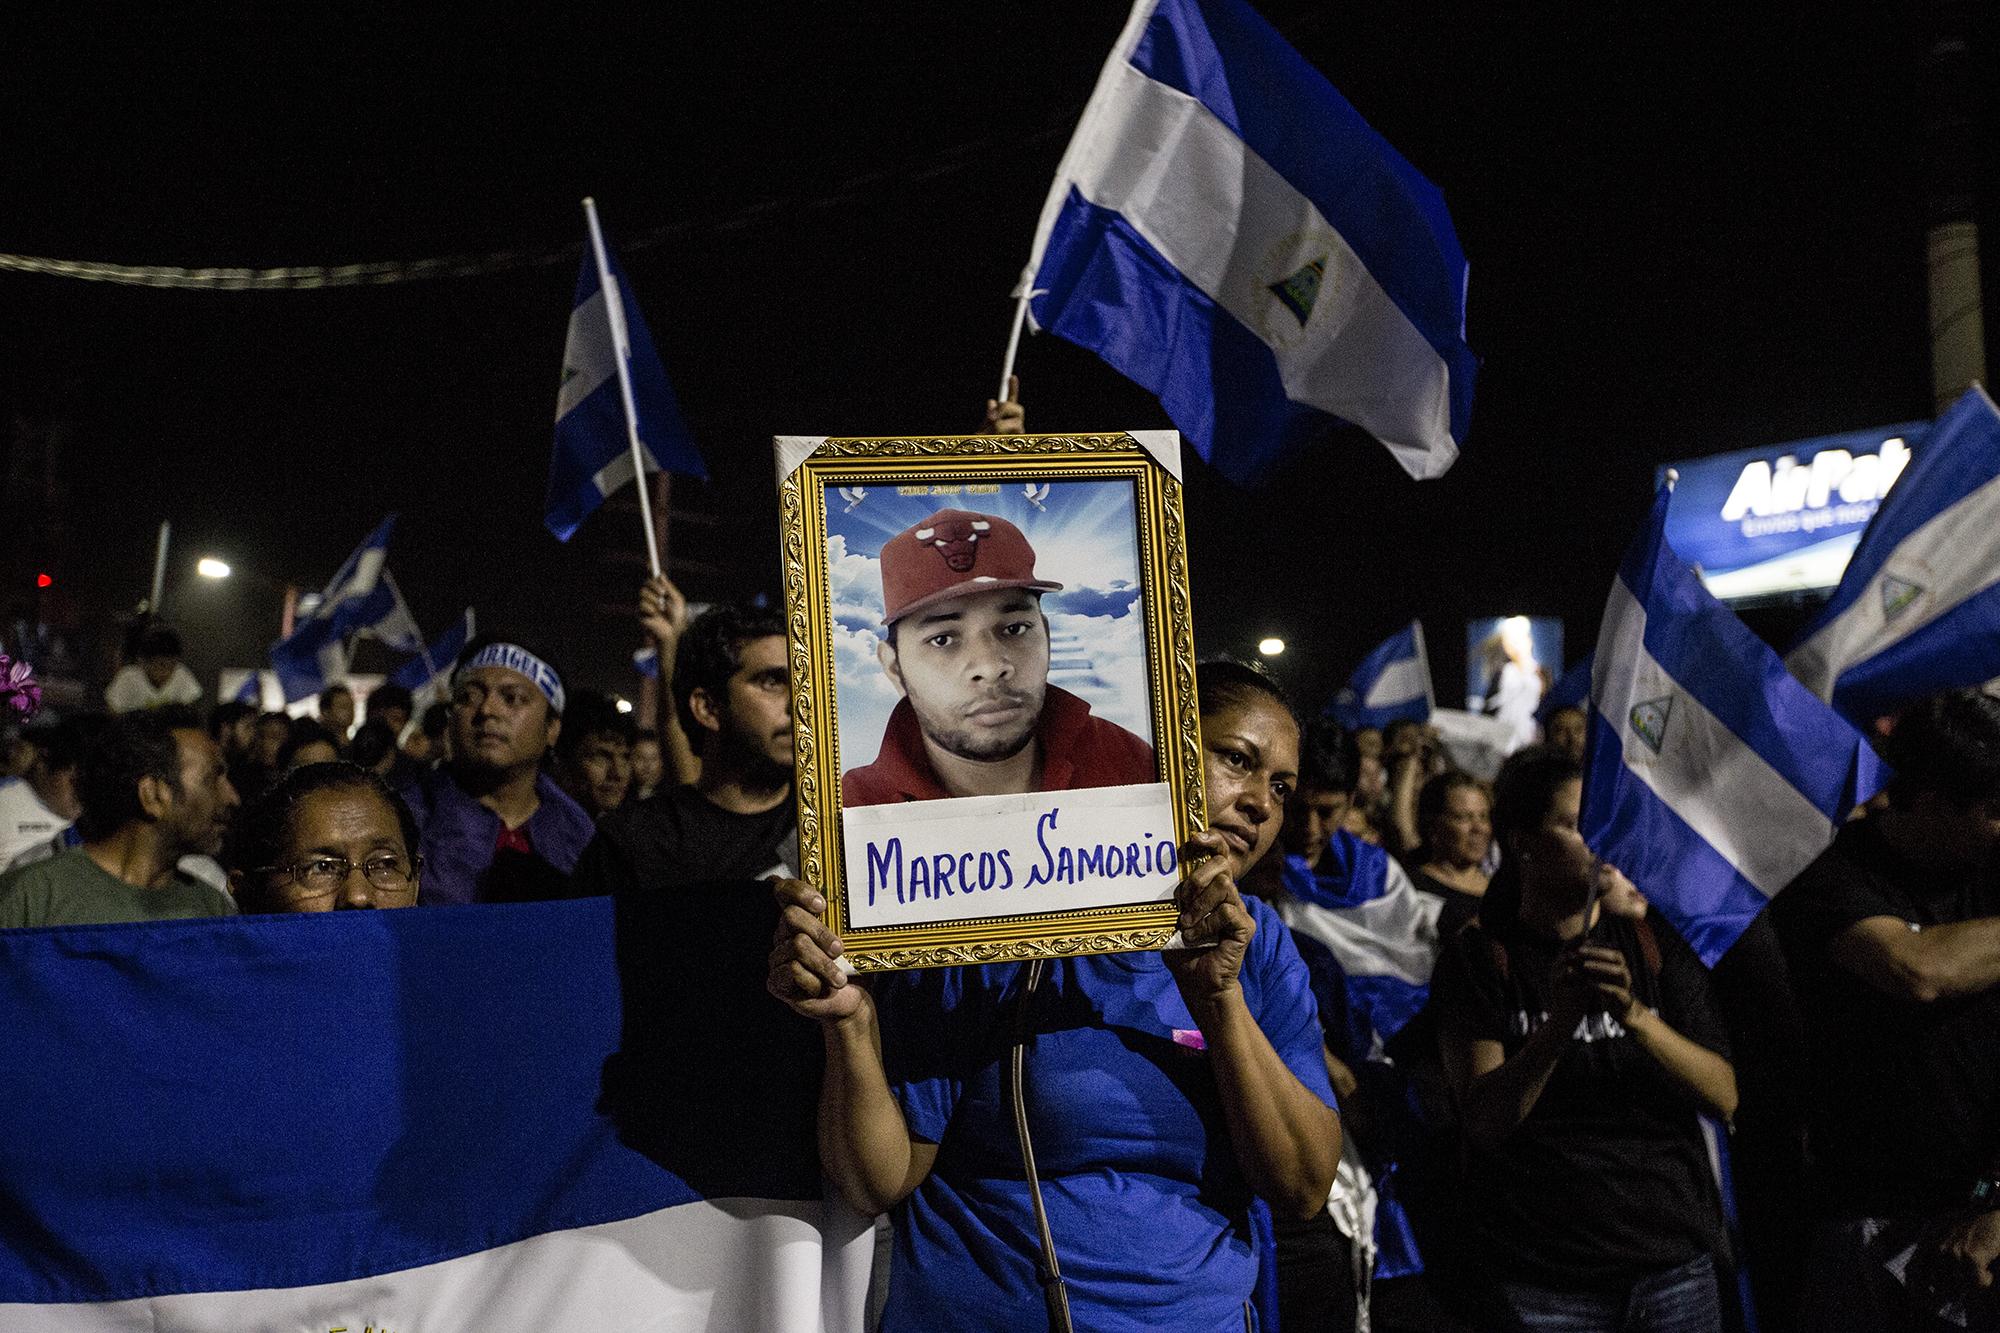 The aunt of Marcos Samorio holds up a photo of her nephew. Samorio, a 30-year-old employee of an agricultural business, was shot by Nicaraguan government riot squads on his way home from work on Apr. 20, 2018. He succumbed to his wounds in the hospital shortly after, and that night Nicaraguans gathered at Managua